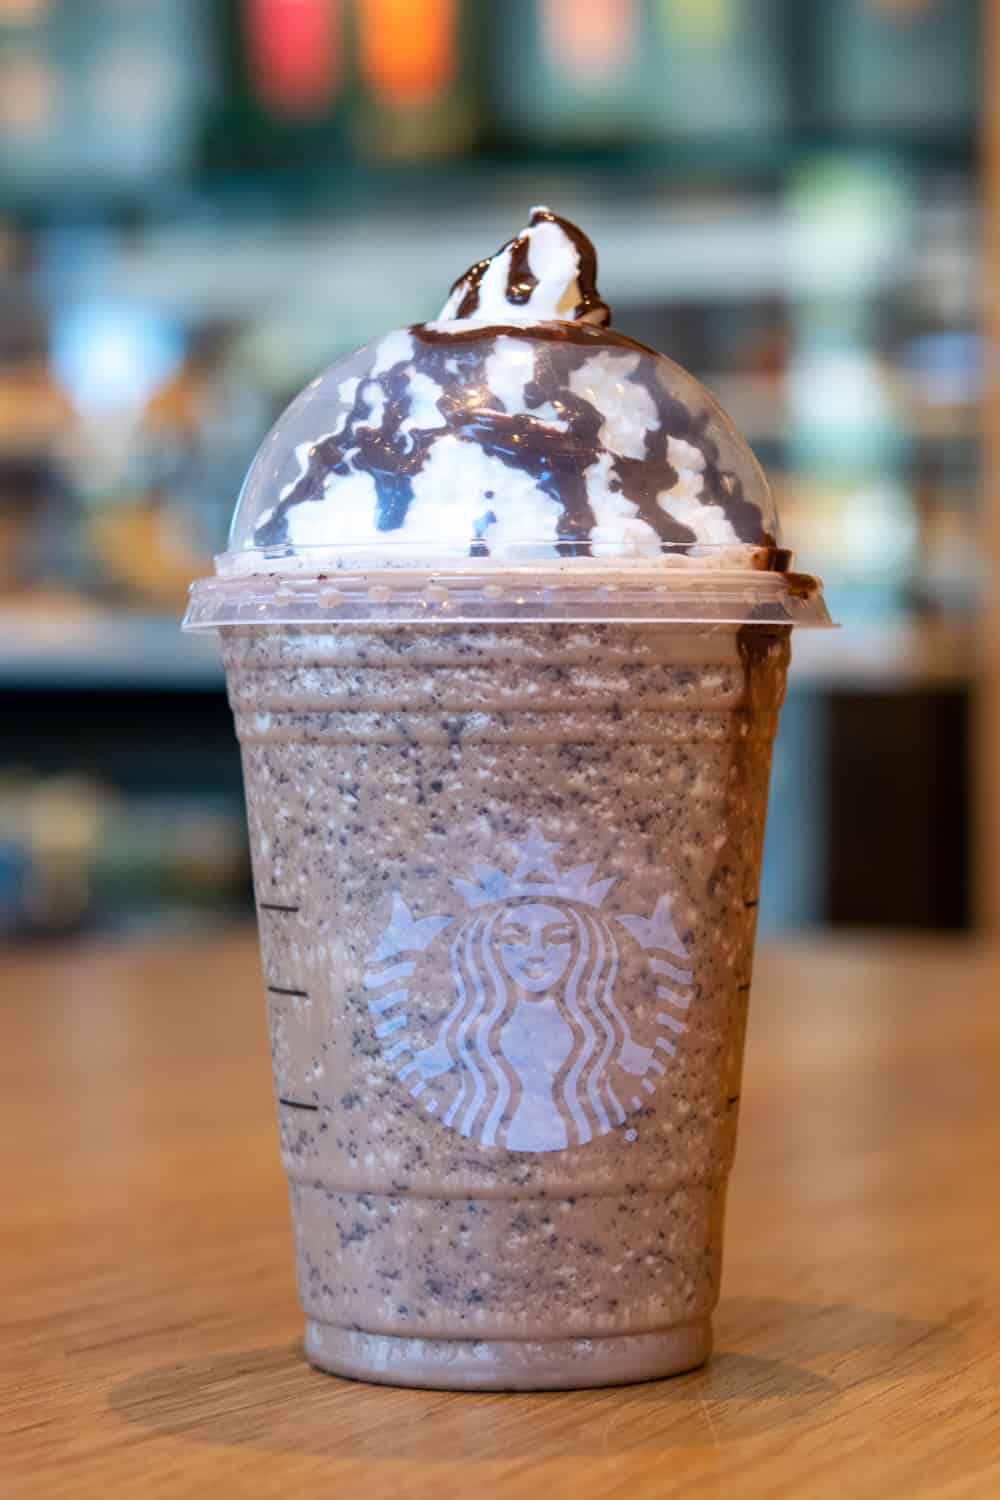 Can I Drink Starbucks Frappuccino While Pregnant? 